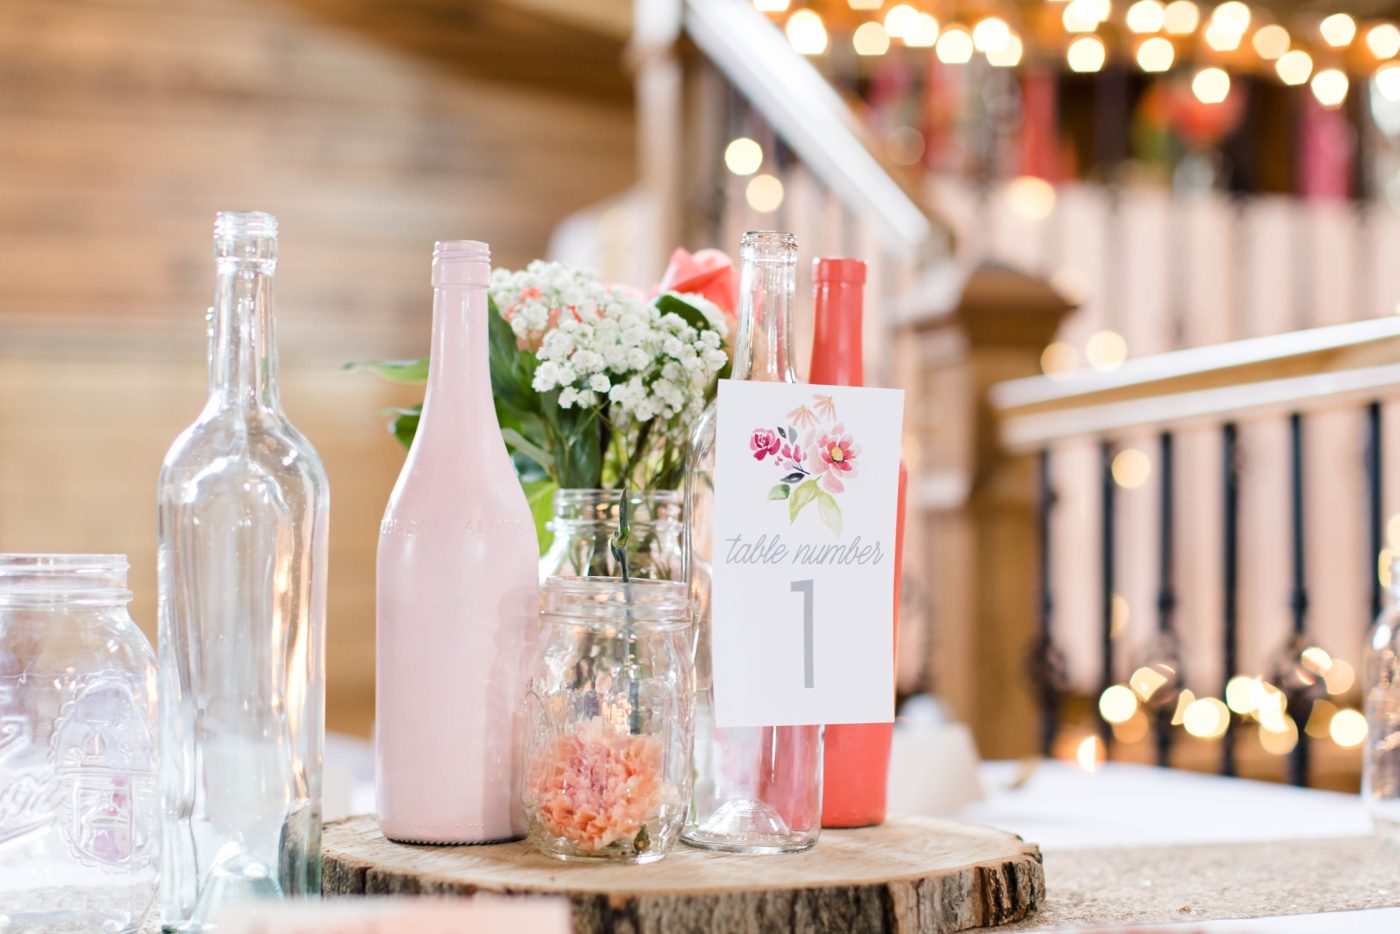 Centerpiece inspiration for a colorful coral wedding 